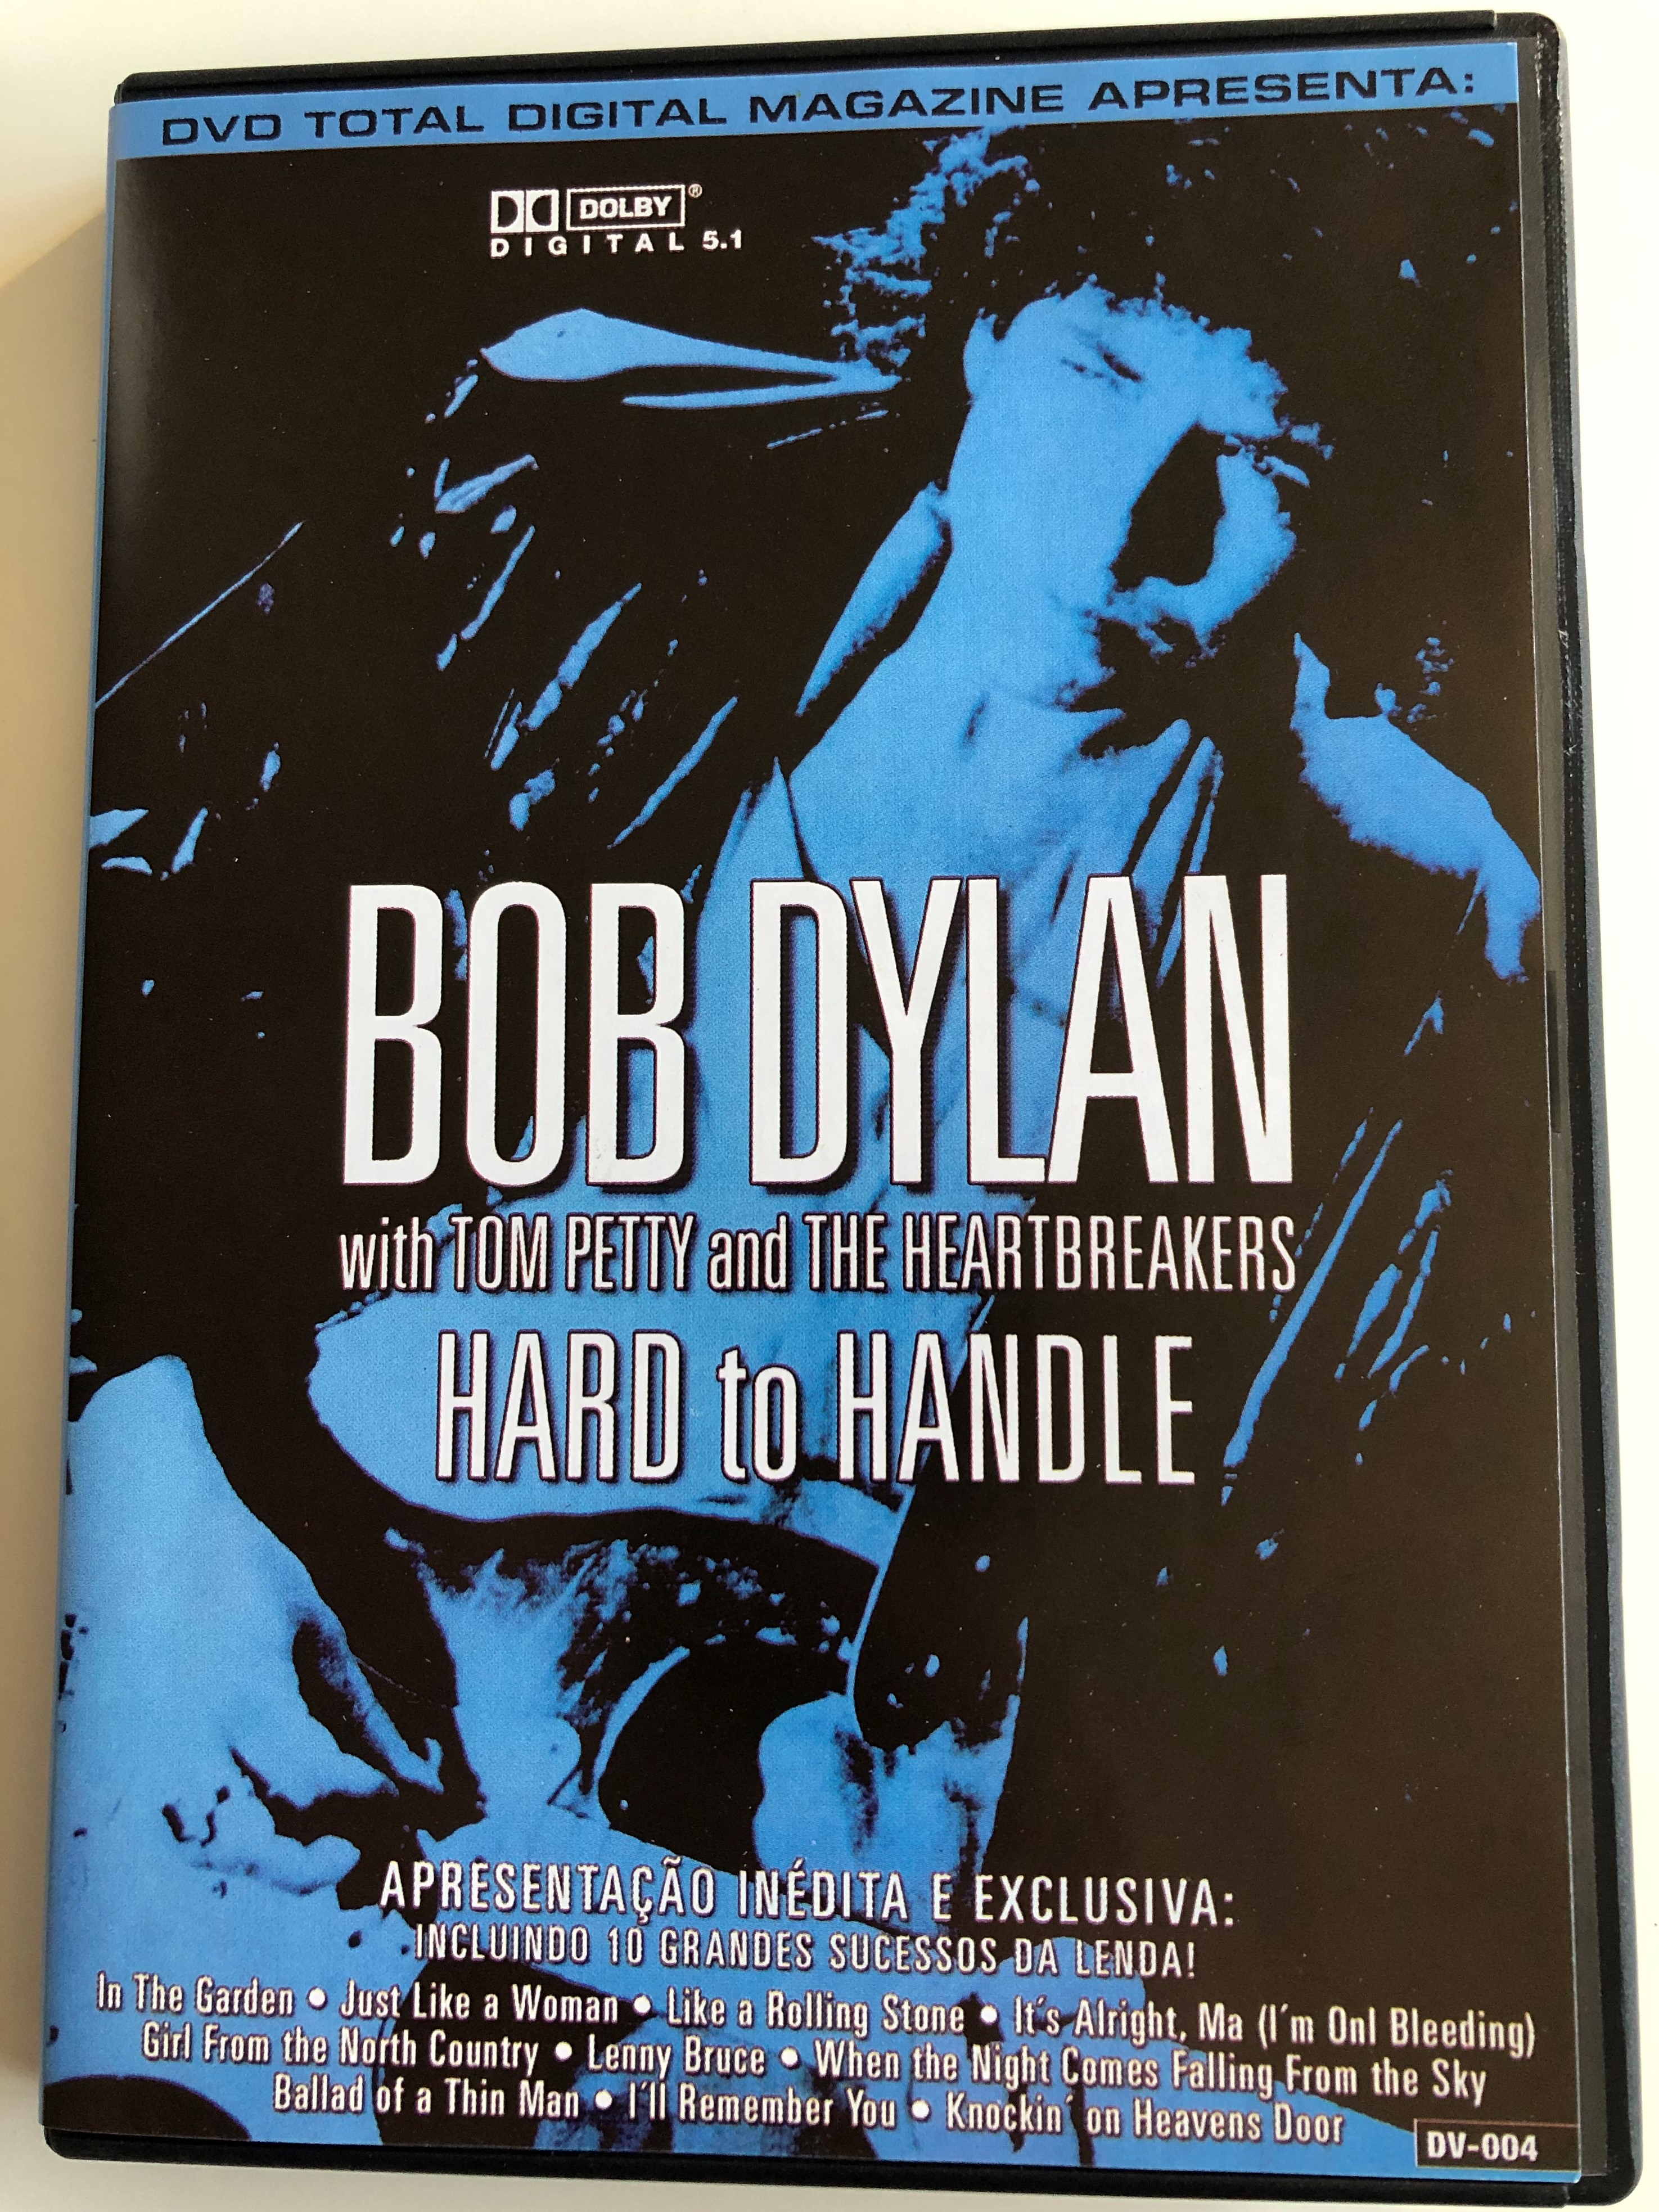 hard-to-handle-dvd-bob-dylan-with-tom-petty-and-the-heartbreakers-1.jpg